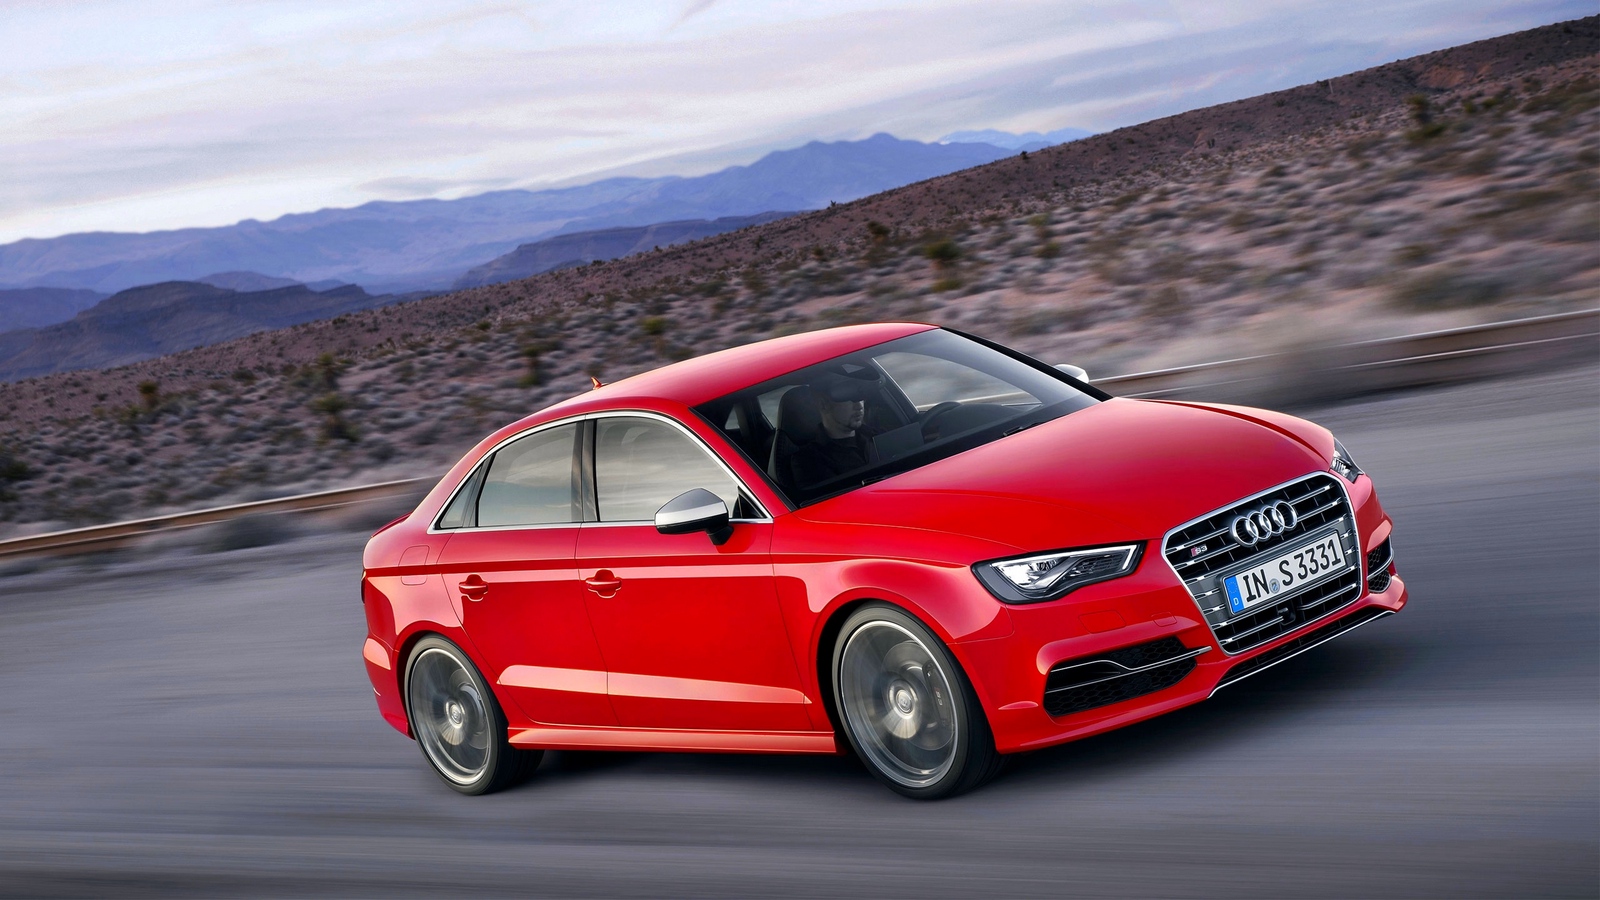 Download wallpaper 1600x900 audi s3 red side view widescreen 16 1600x900